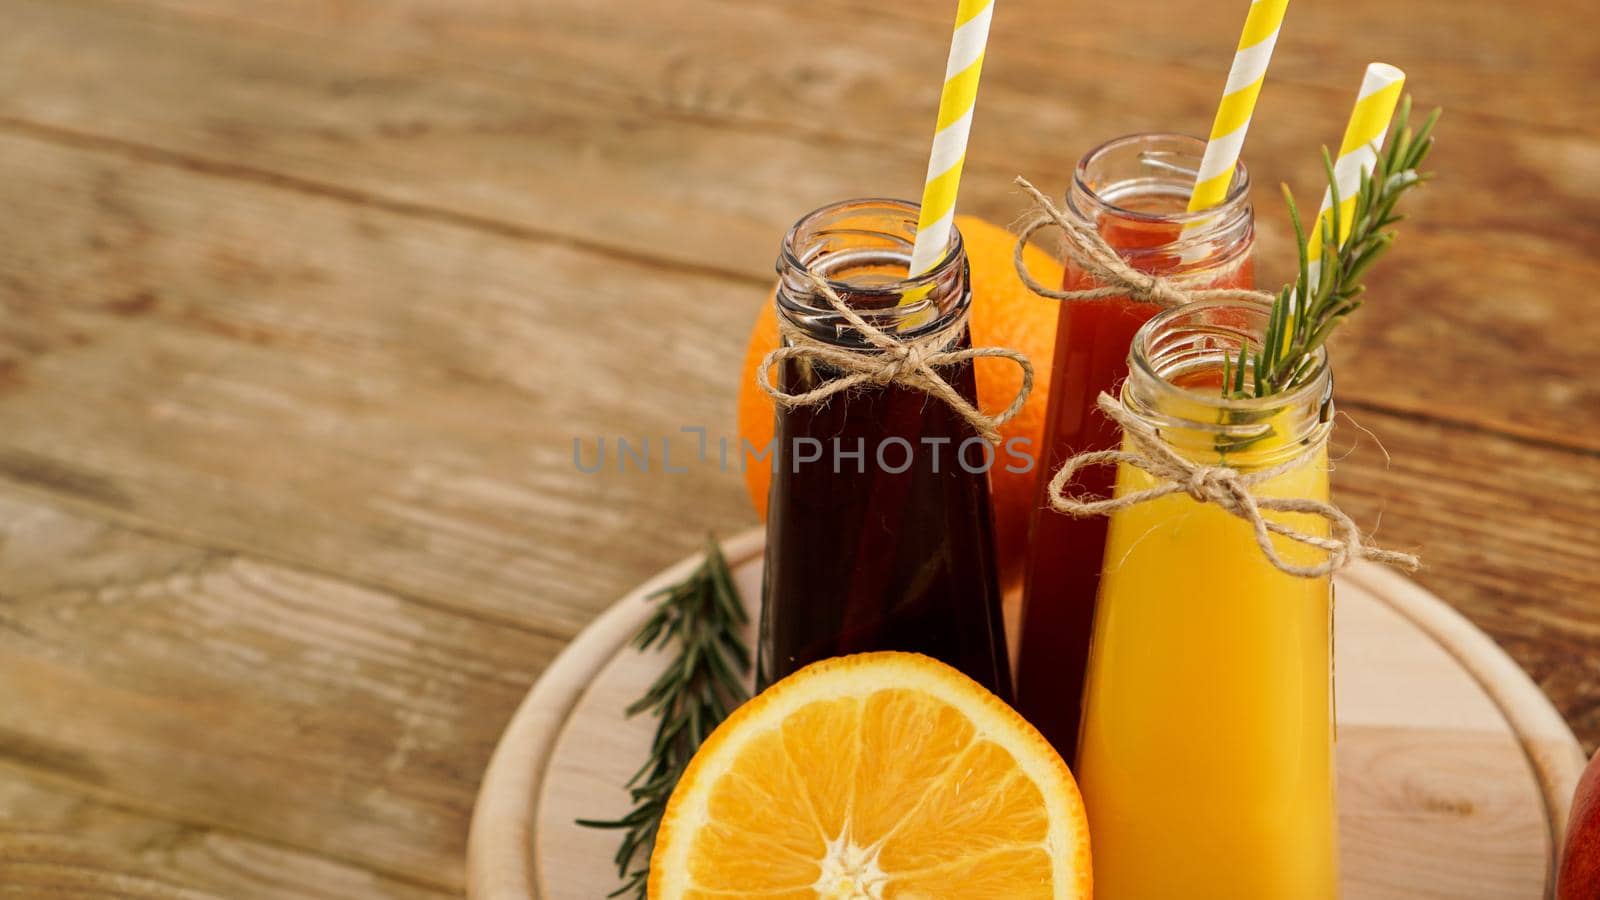 Home made lemonade in little bottles. Multicolored juices and fruits on wooden background